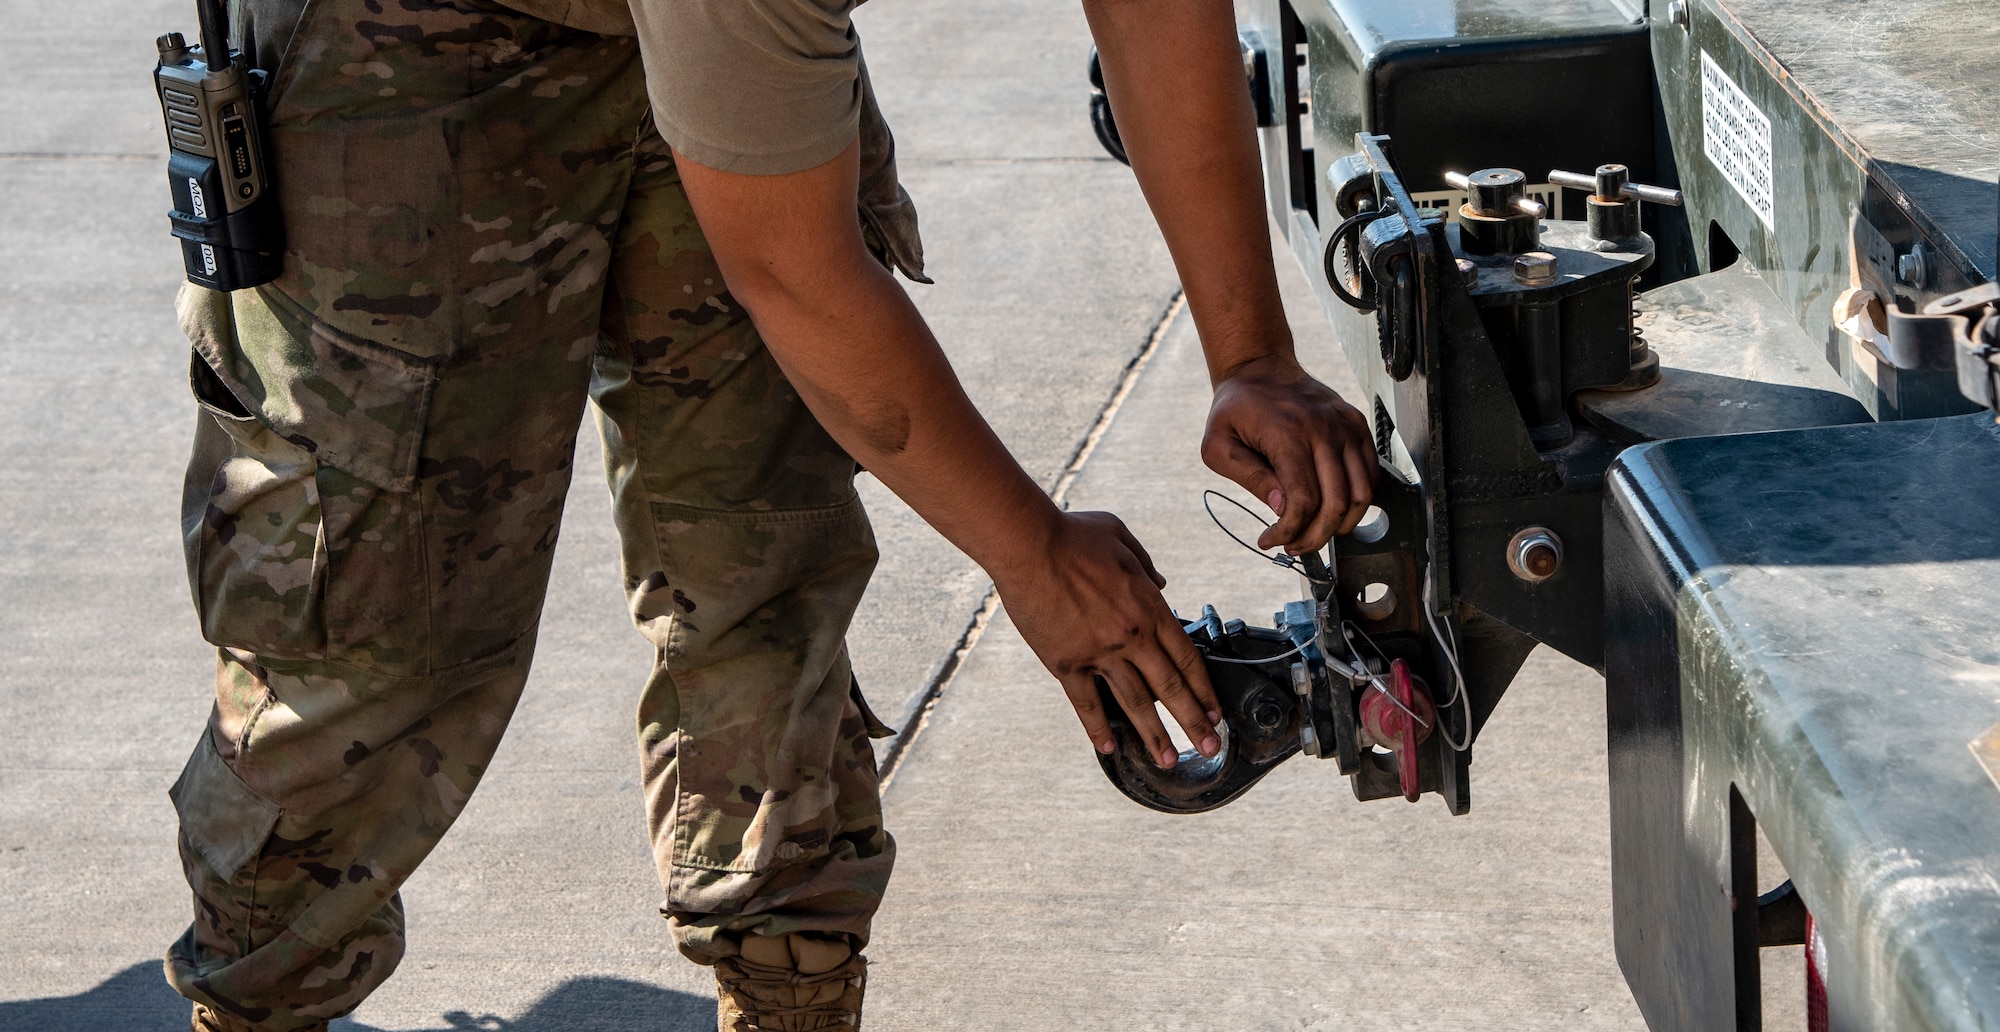 Senior Airman Jacob Karn, an Aerospace Ground Equipment Mechanic with the 332d Expeditionary Maintenance Squadron, puts a pin in a truck's tow hitch at an undisclosed location, Southwest Asia, Nov. 11, 2022. These cranes are used to remove the canopy of an F-15E Fighting Falcon for repairs. (U.S. Air Force photo by: Tech. Sgt. Jim Bentley)